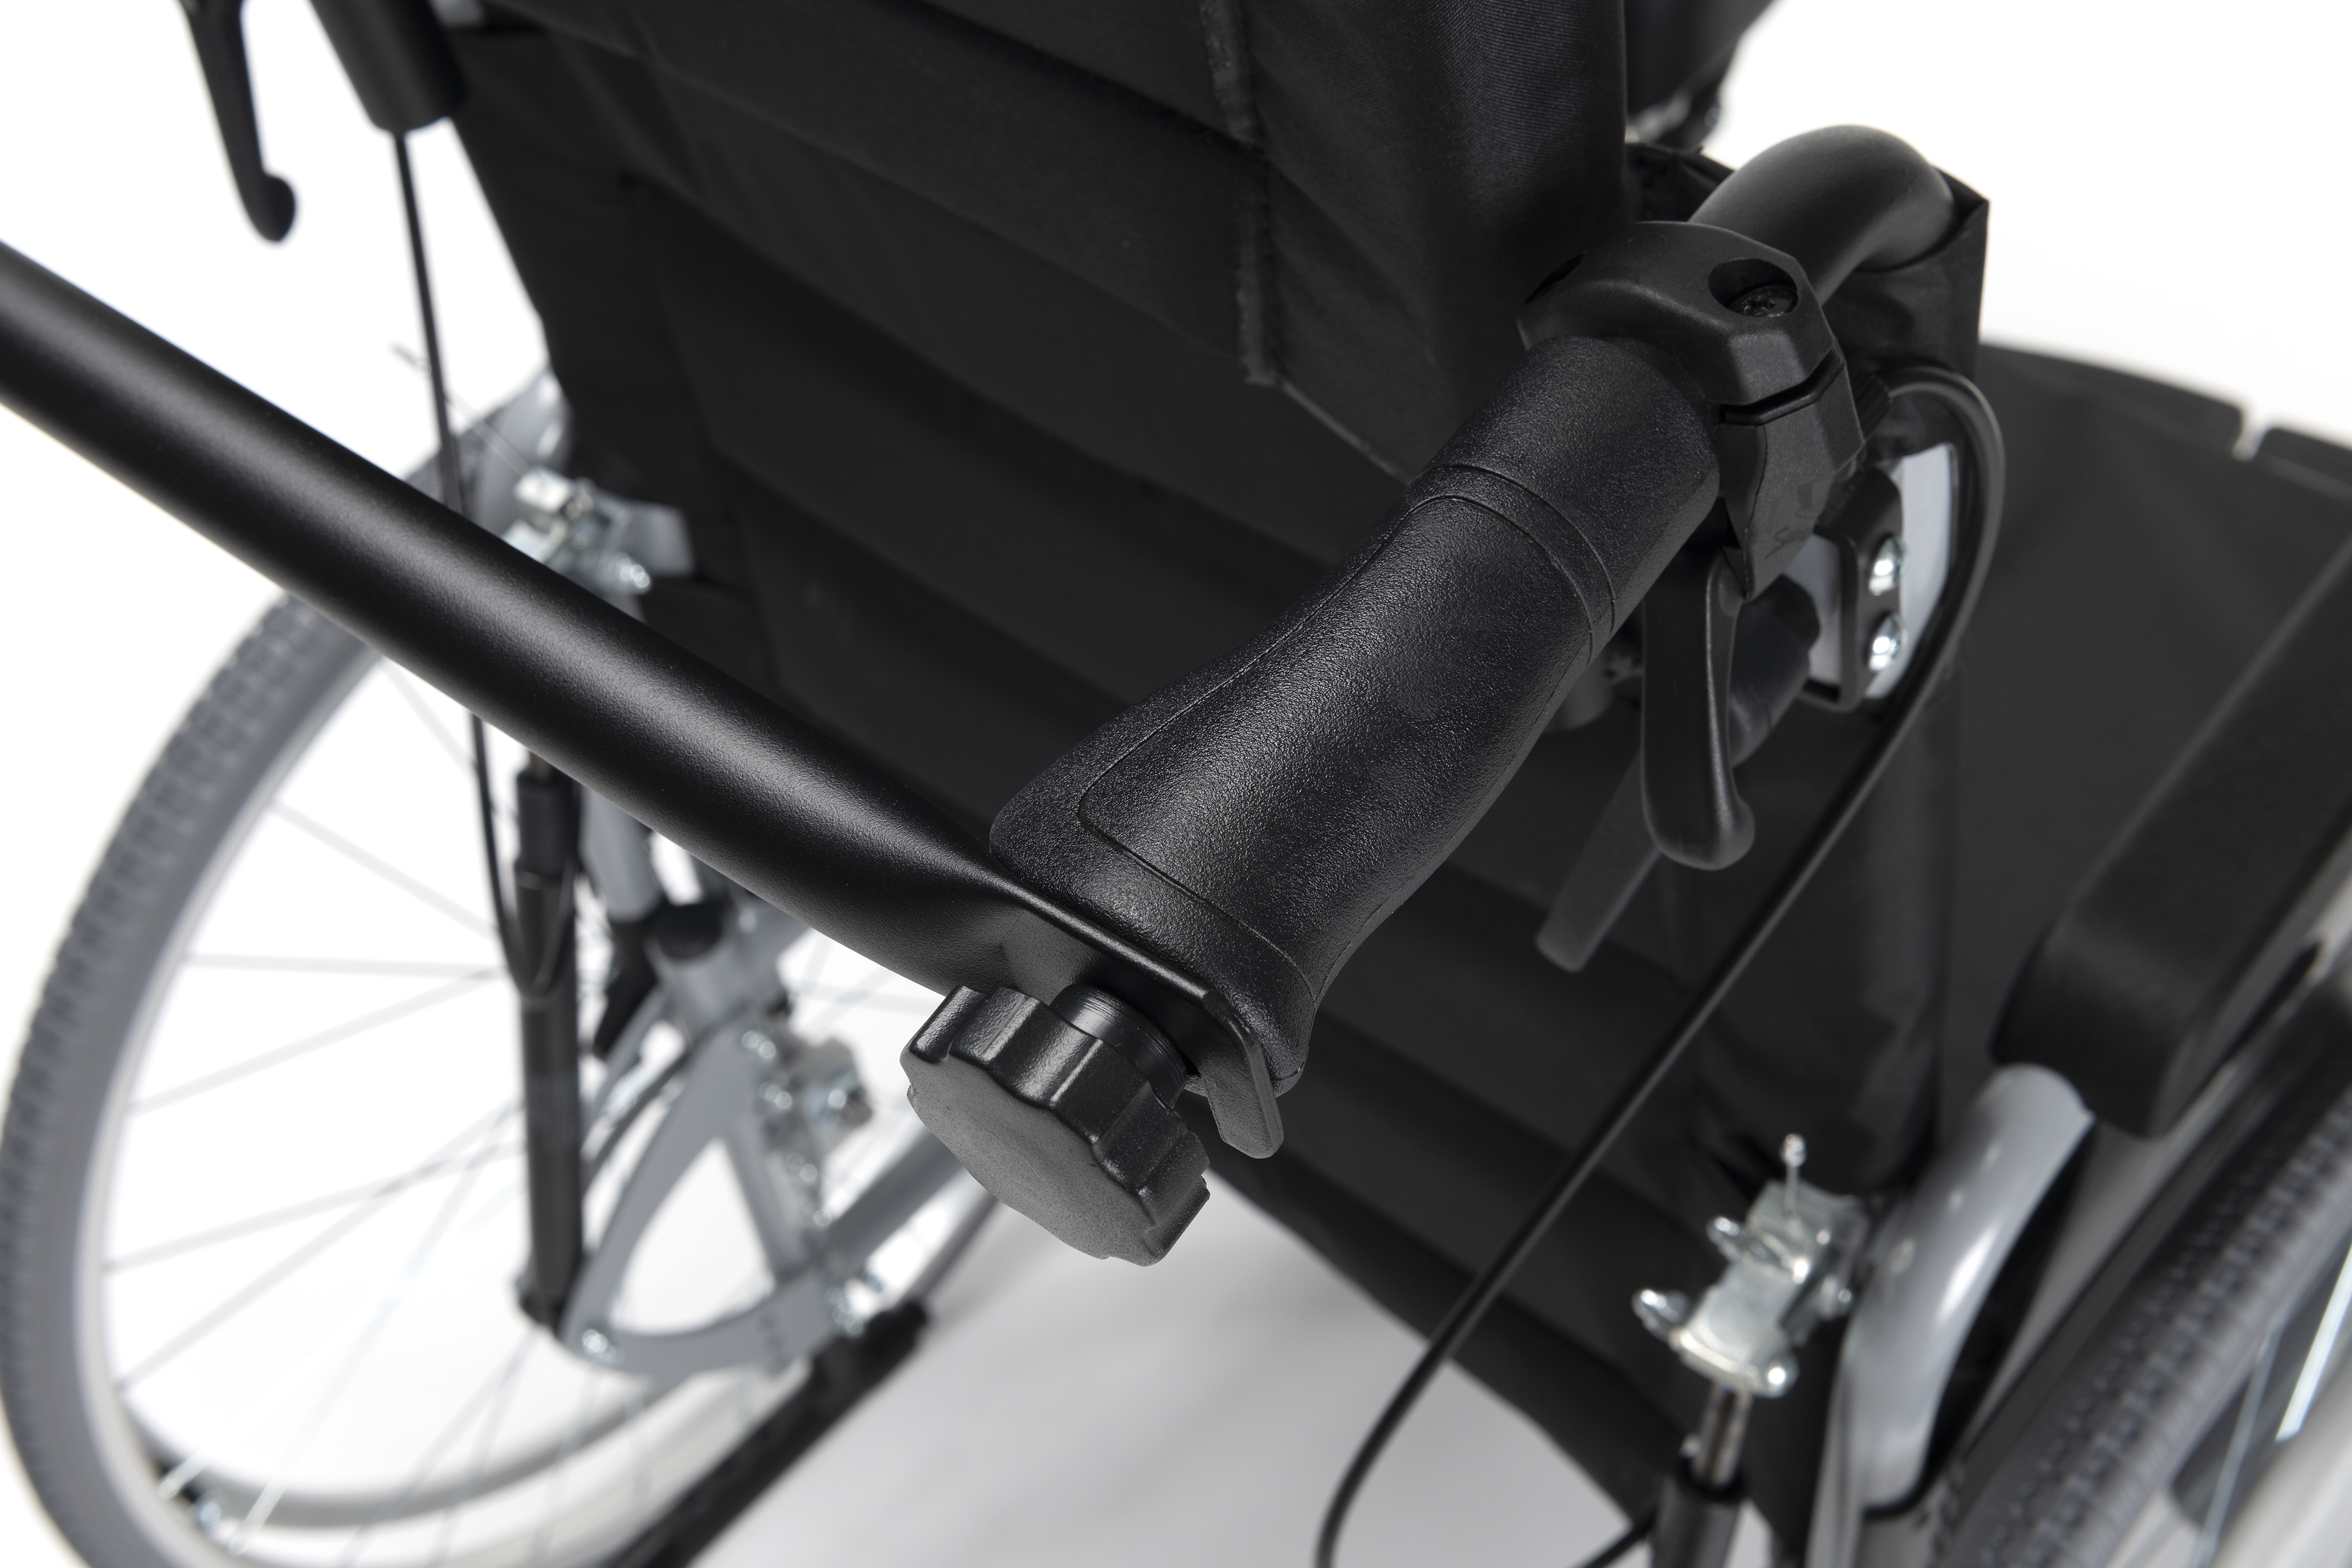 Manually Propelled Wheelchair-Reclinable 30° Eclips Plus Vermeiren